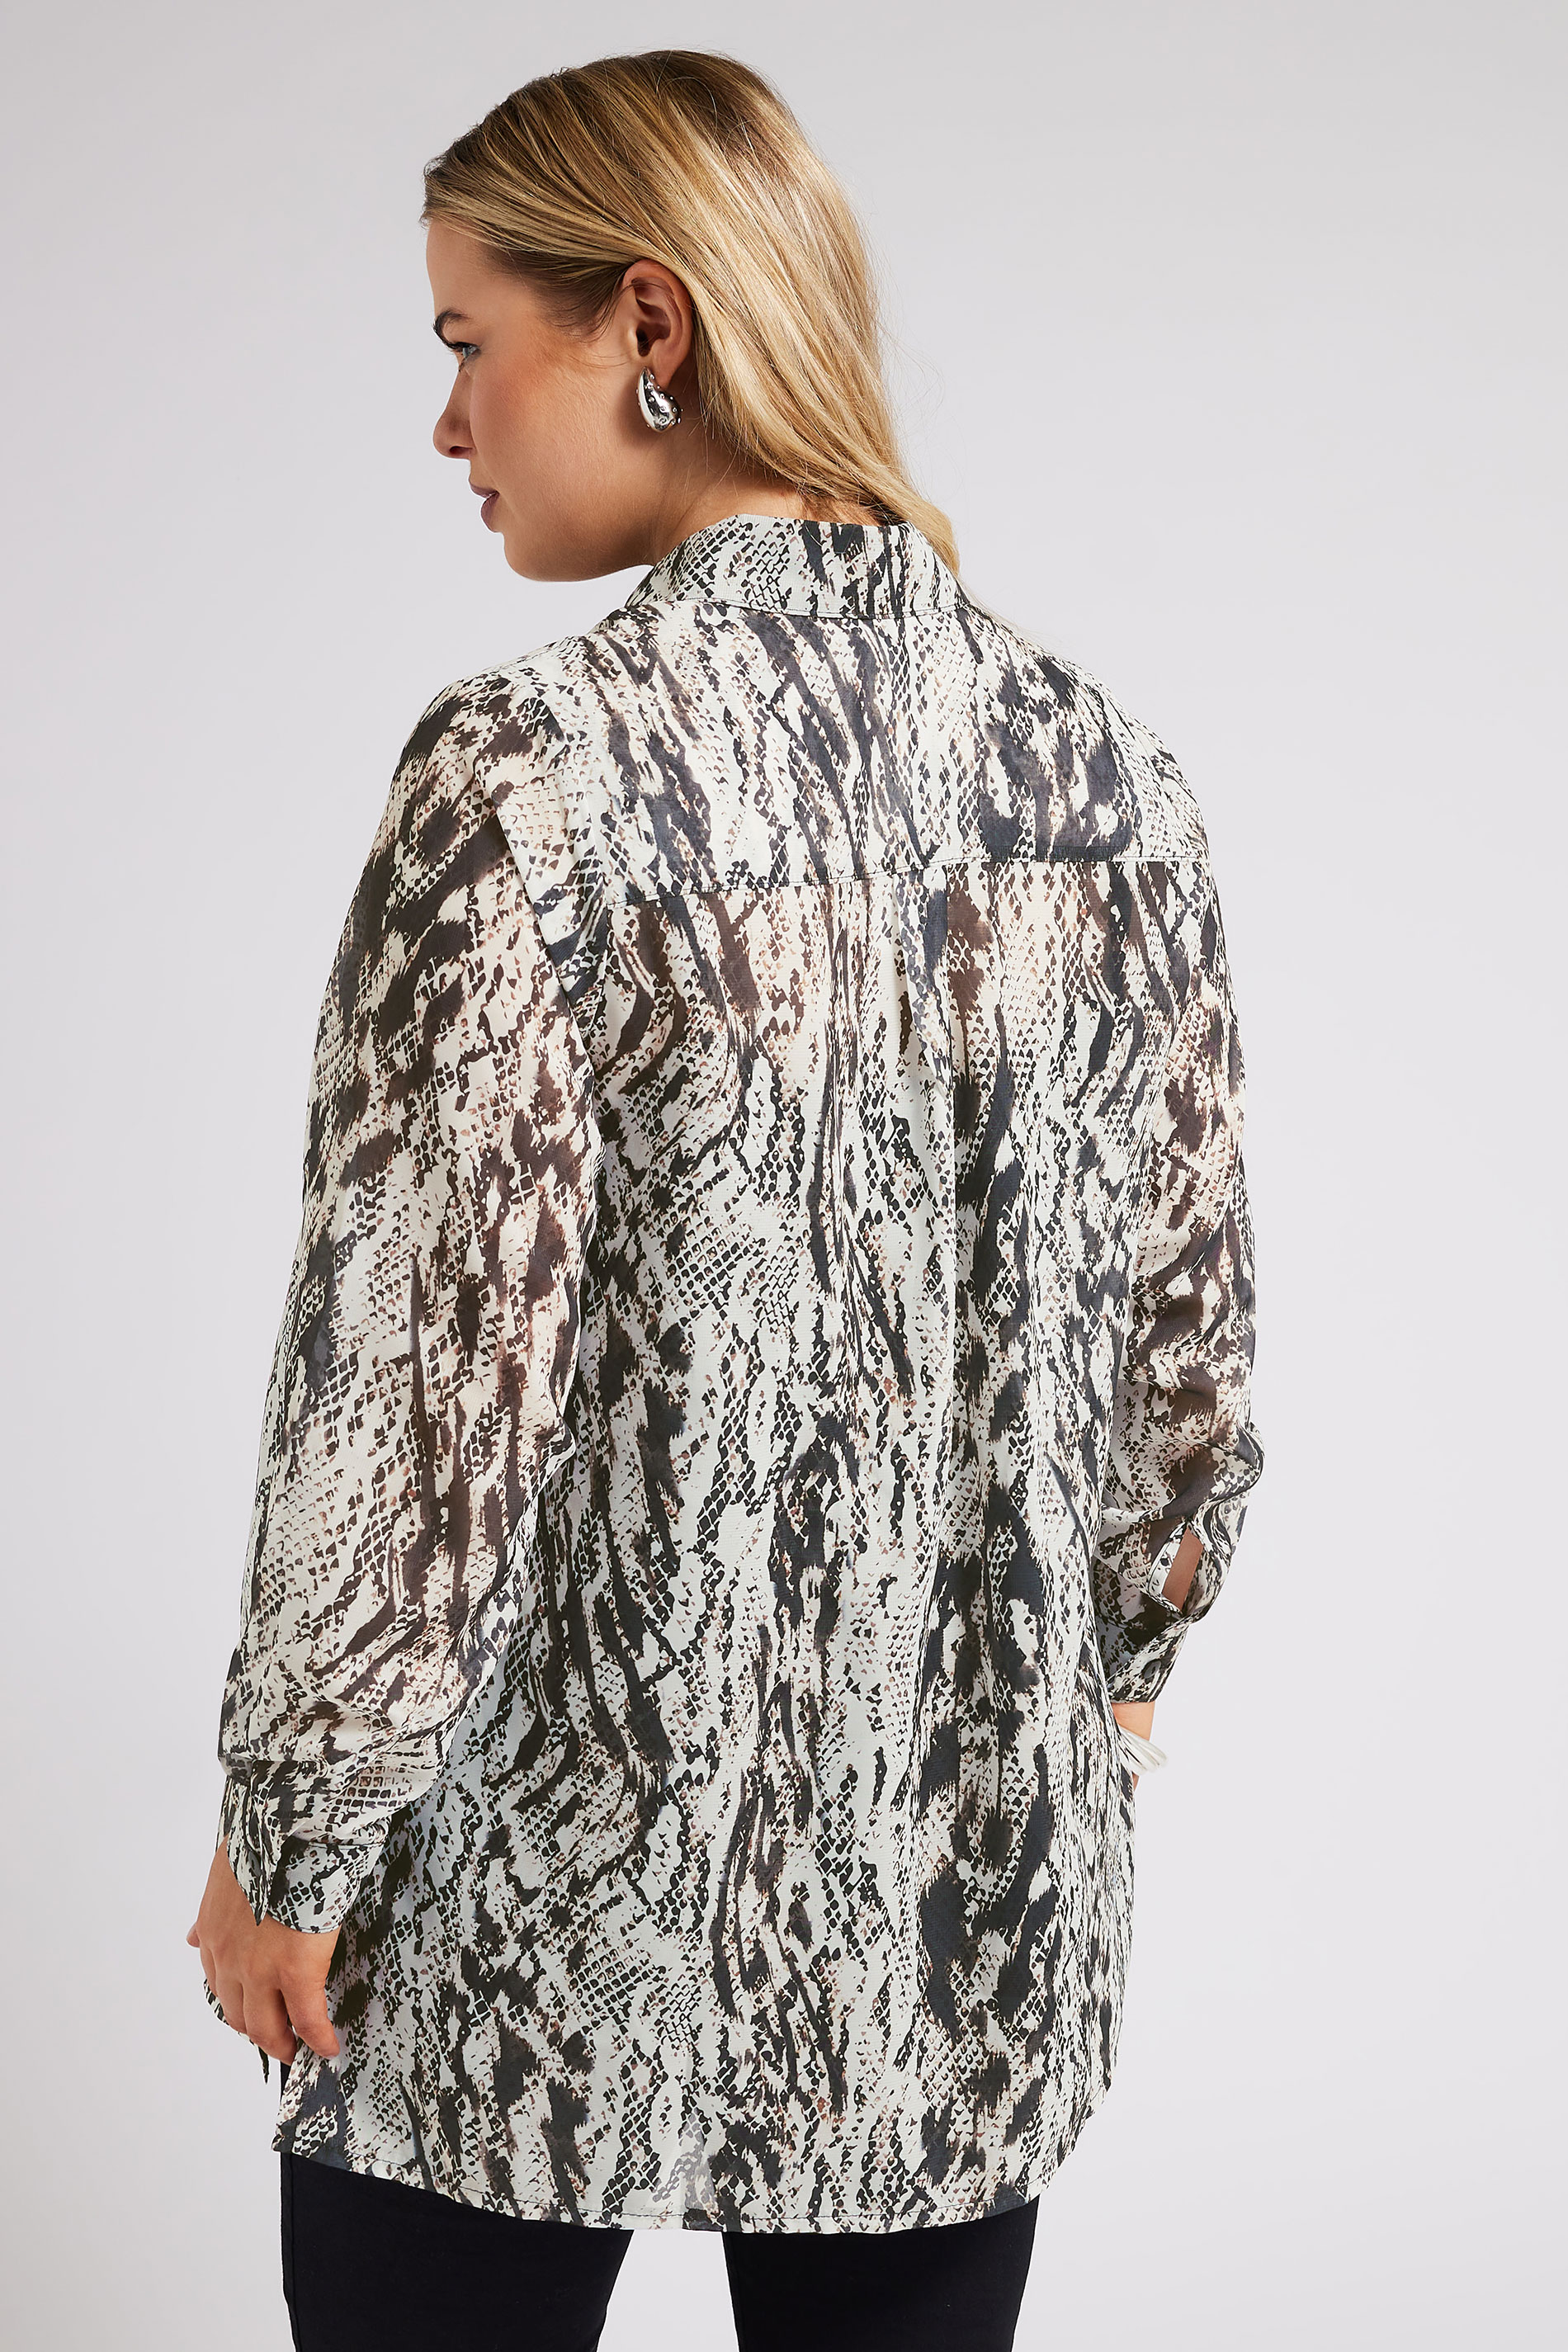 YOURS LONDON Plus Size White Snake Print Shirt | Yours Clothing 3